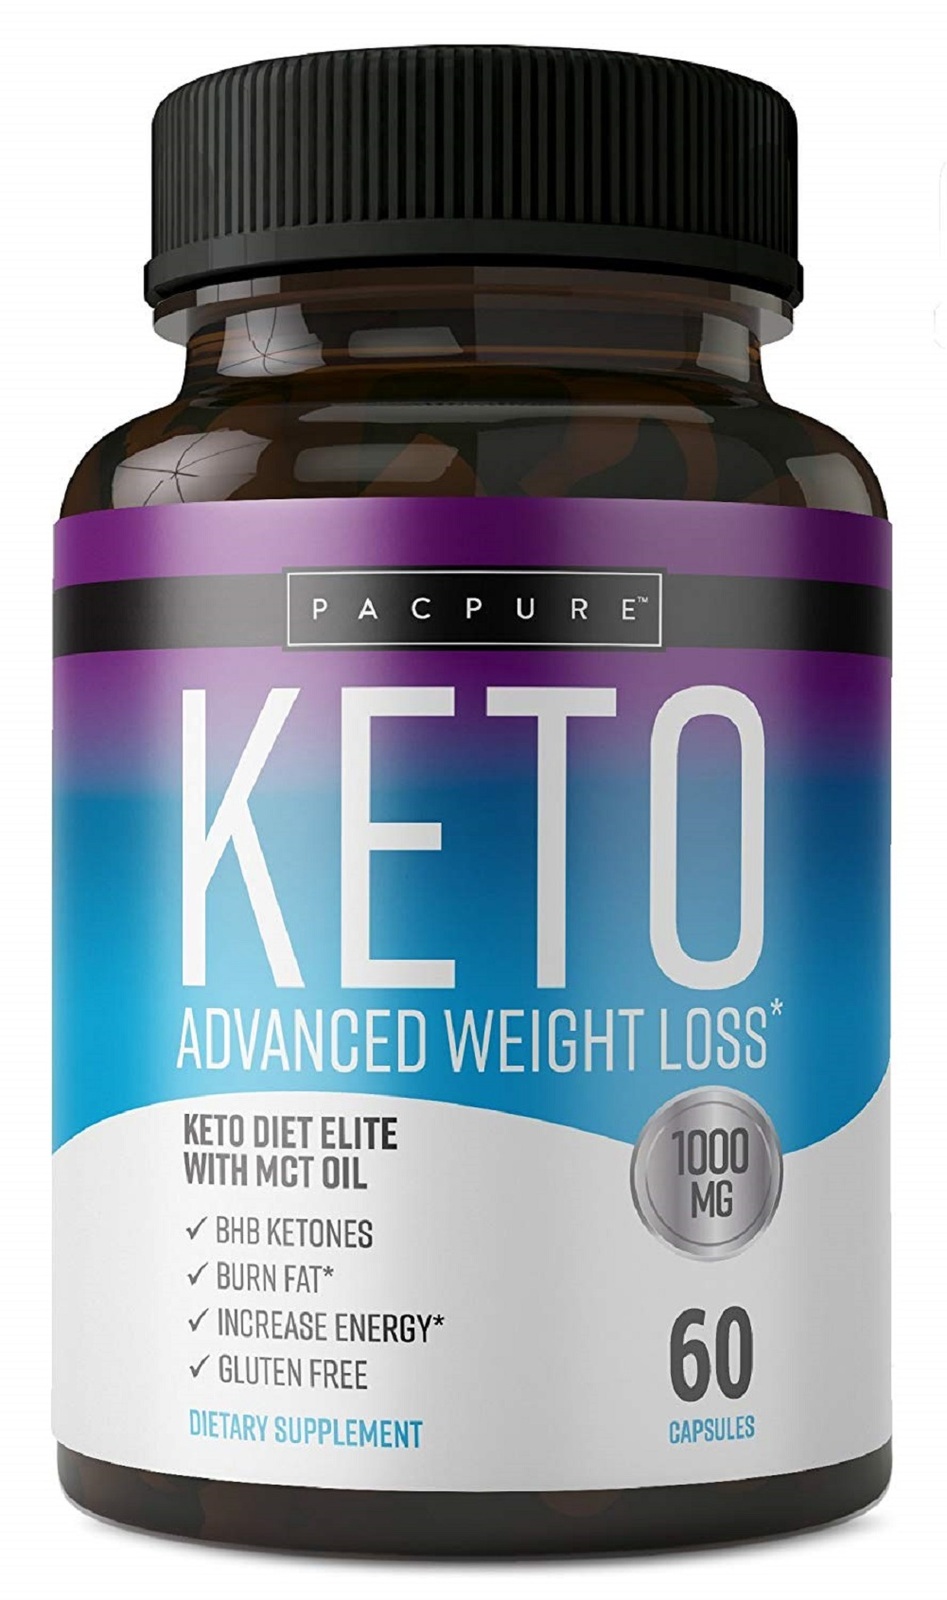 PacPure Nutrition Keto Diet Elite + MCT Oil- 1000mg Advanced Weight Loss 60 Caps